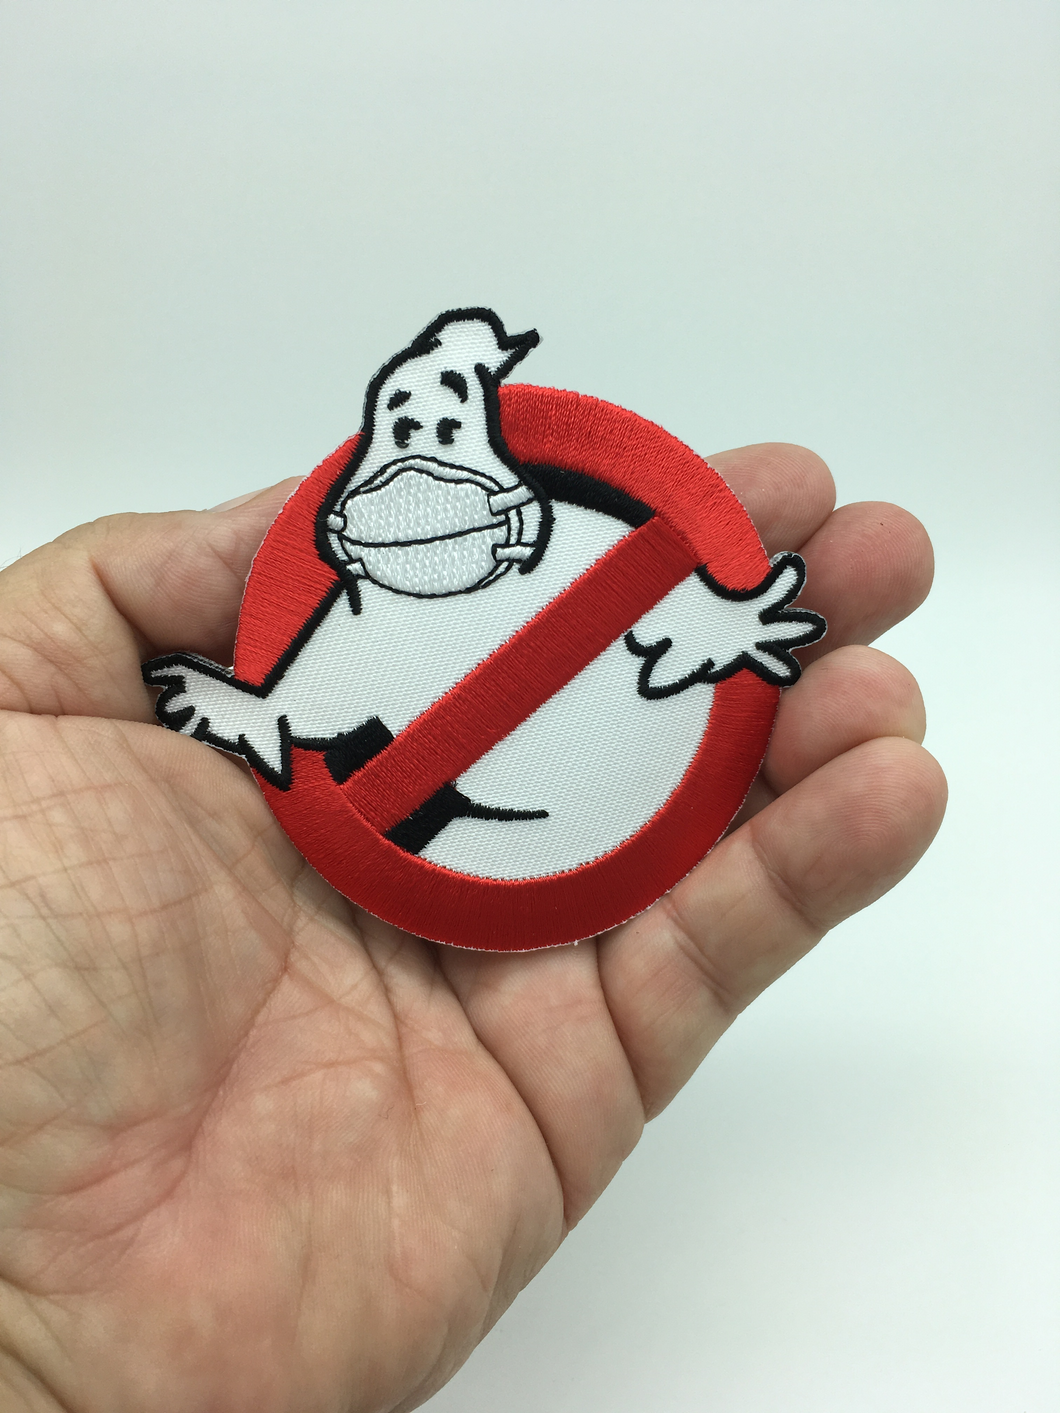 25-GB Ghostbusters Mooglie Covid 19 Patch - www.ChallengeCoinCreations.com